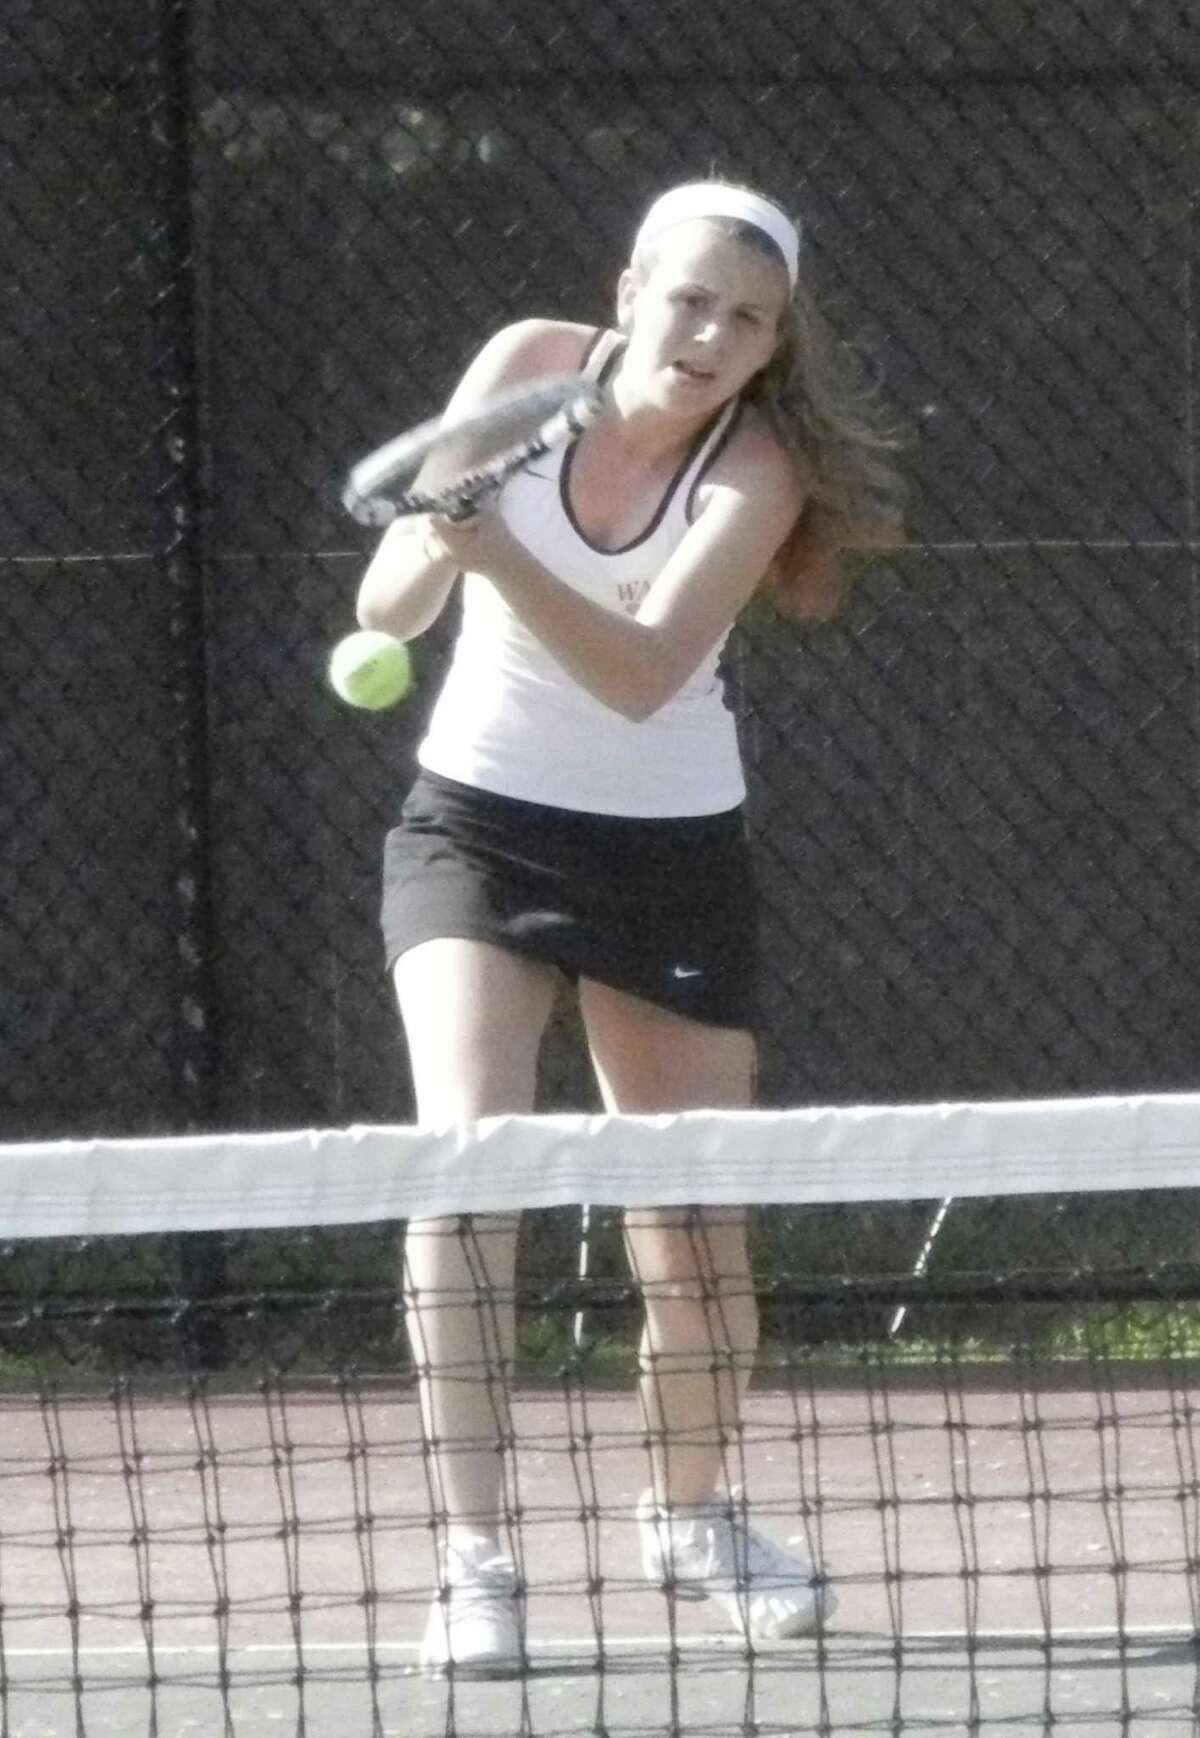 Fairfield Warde sophomore Jenny Schneider returns a shot to her Ridgefield opponent at No. 2 singles in the Mustangs' 5-2 victory over the Tigers in an FCIAC girls tennis match on Monday, May 19 at the James Blake Courts in Fairfield. Scheider lost her match to Olivia Beatty 6-4, 6-2.